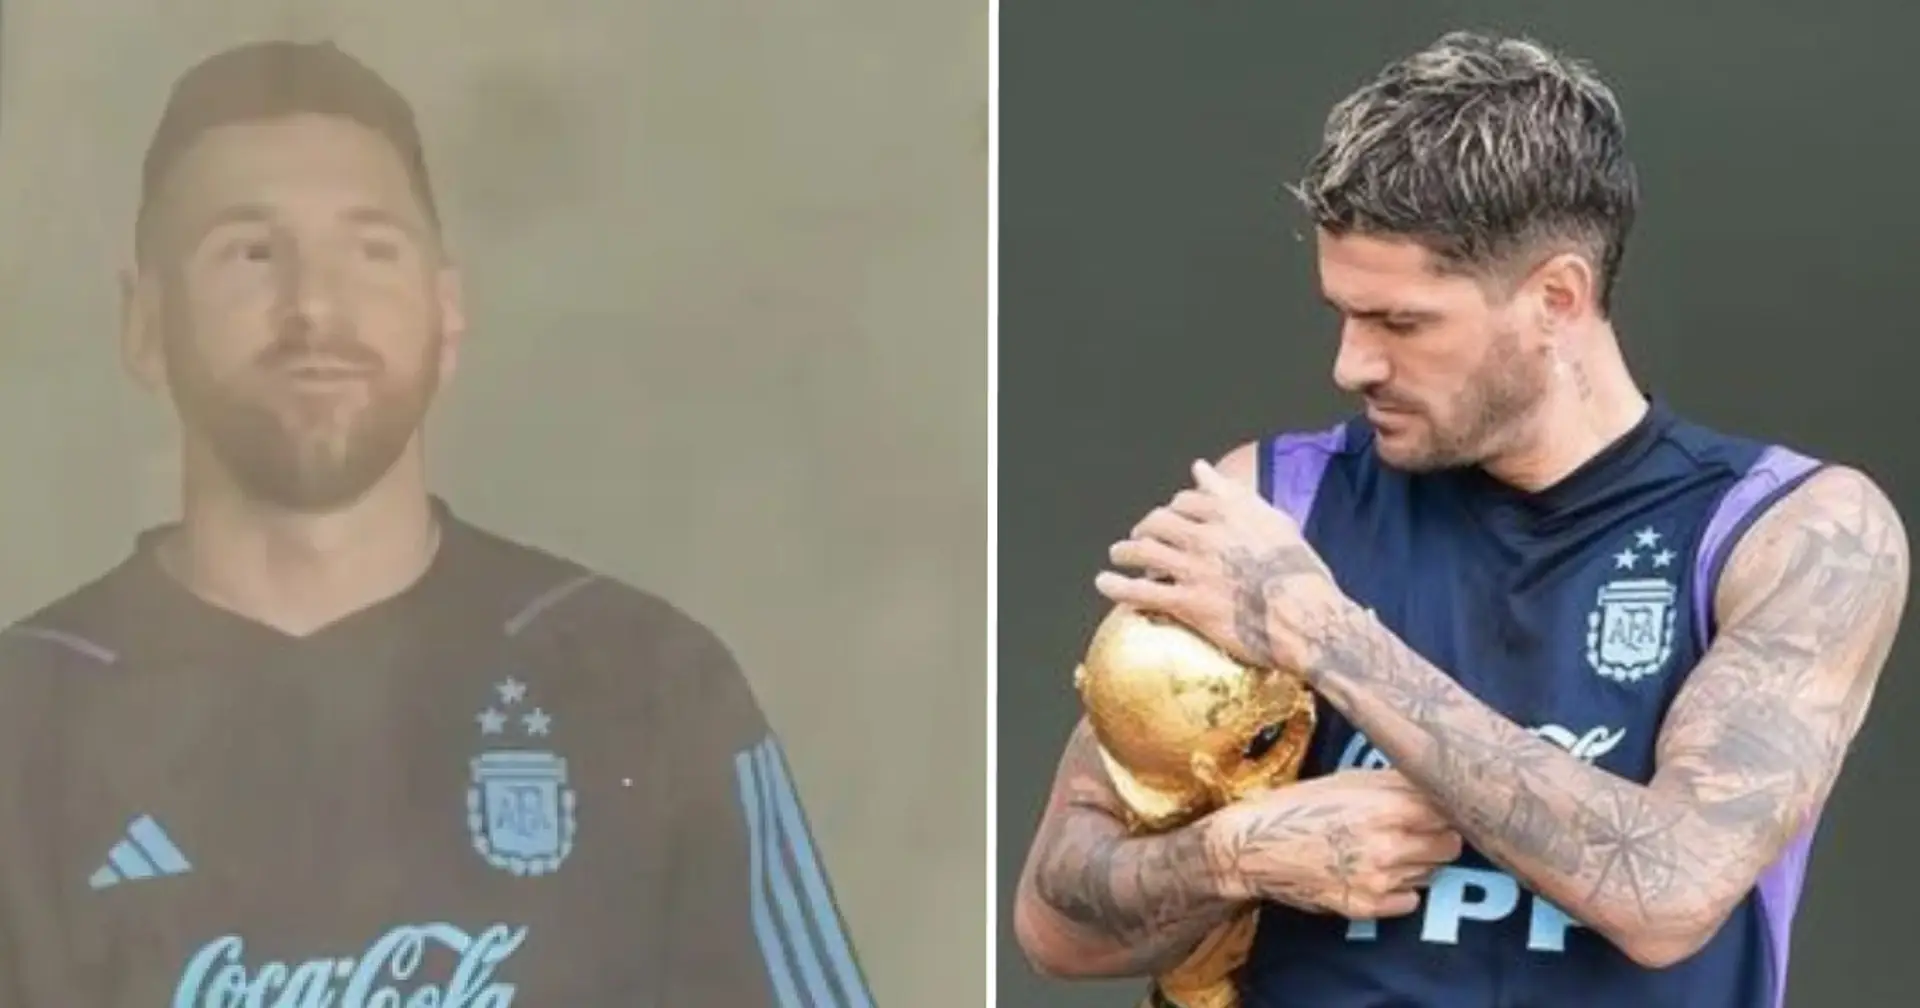 'Should've tagged Ronaldo': De Paul's fresh pic with World Cup trophy and Leo Messi goes viral, fans react